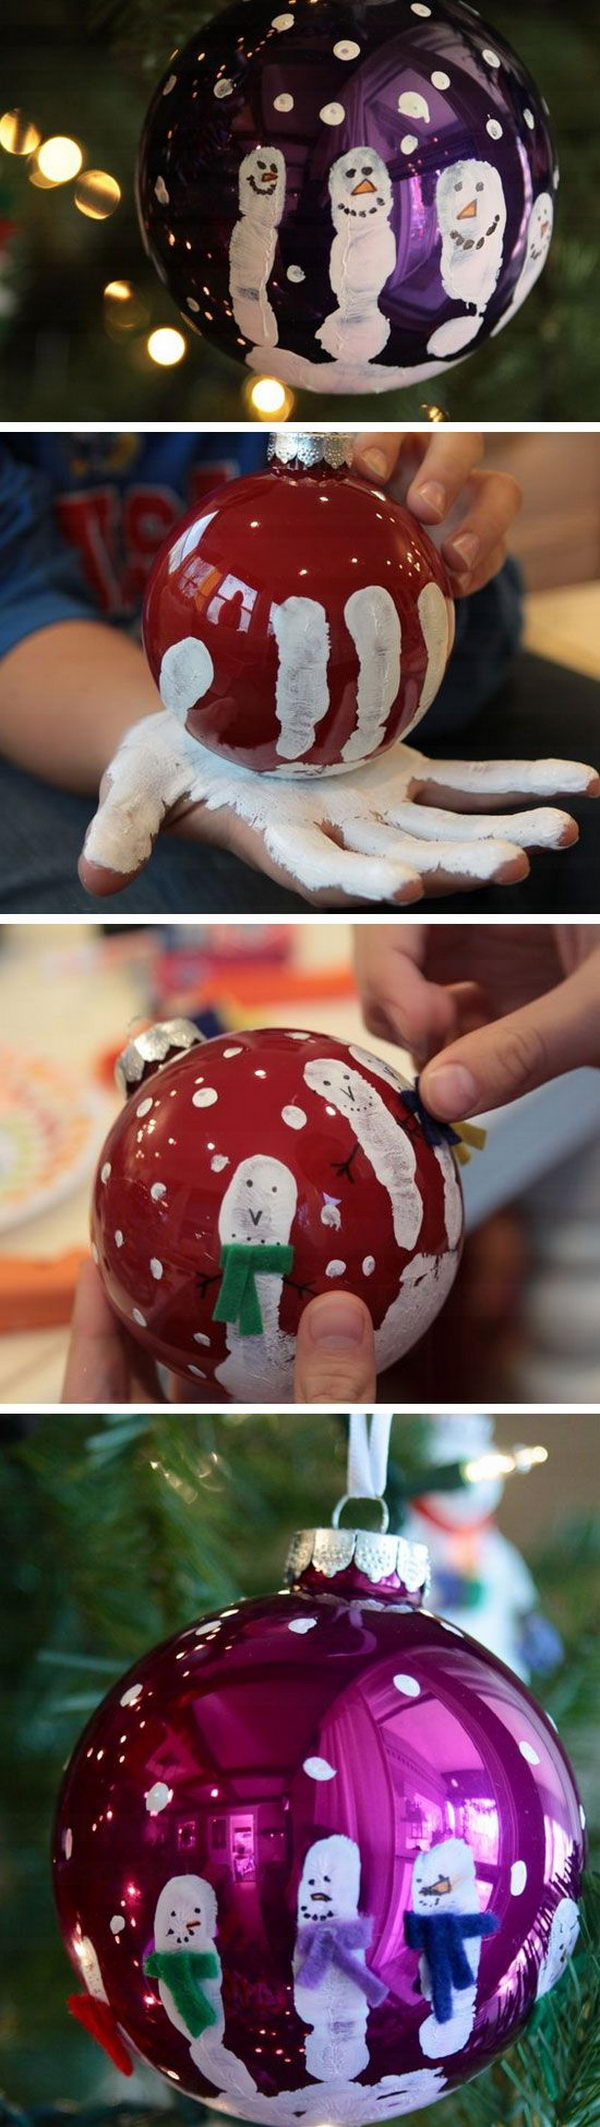 DIY Kids Ornaments
 Easy & Creative Christmas DIY Projects That Kids Can Do